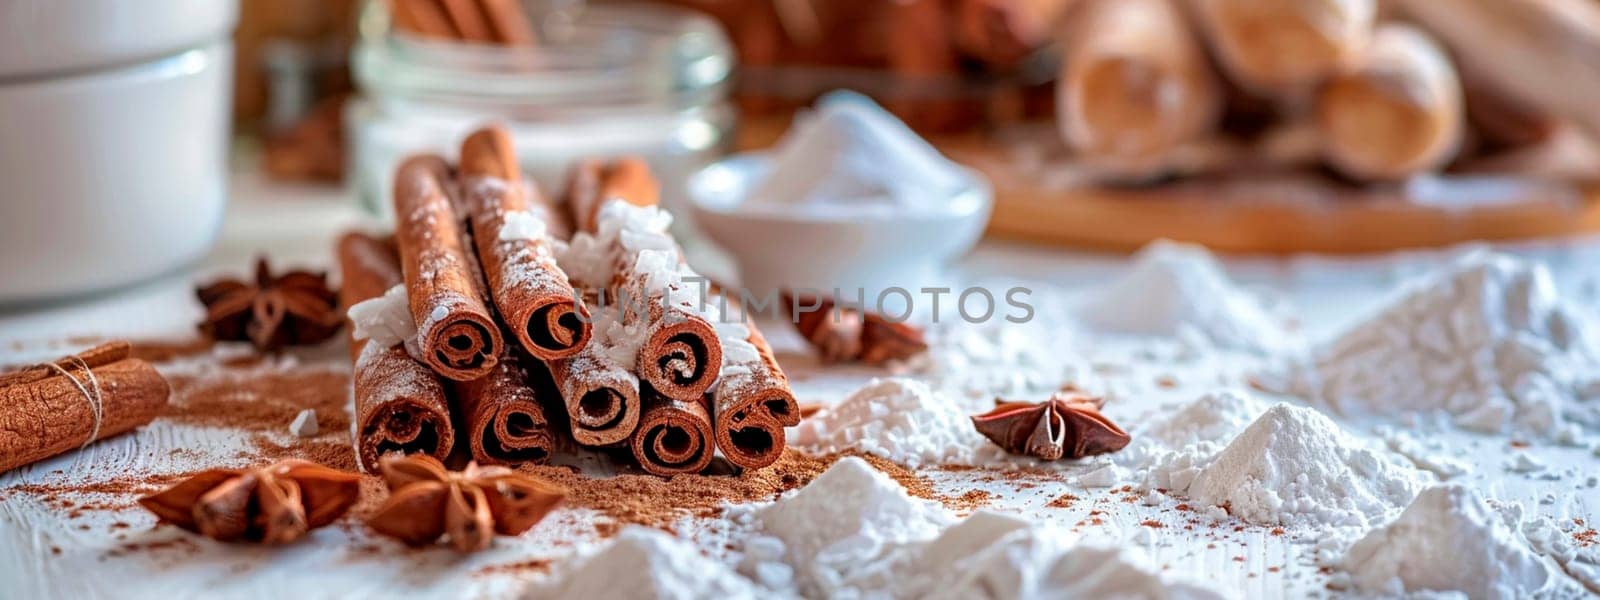 cinnamon flour and anise for baking. Selective focus. food.